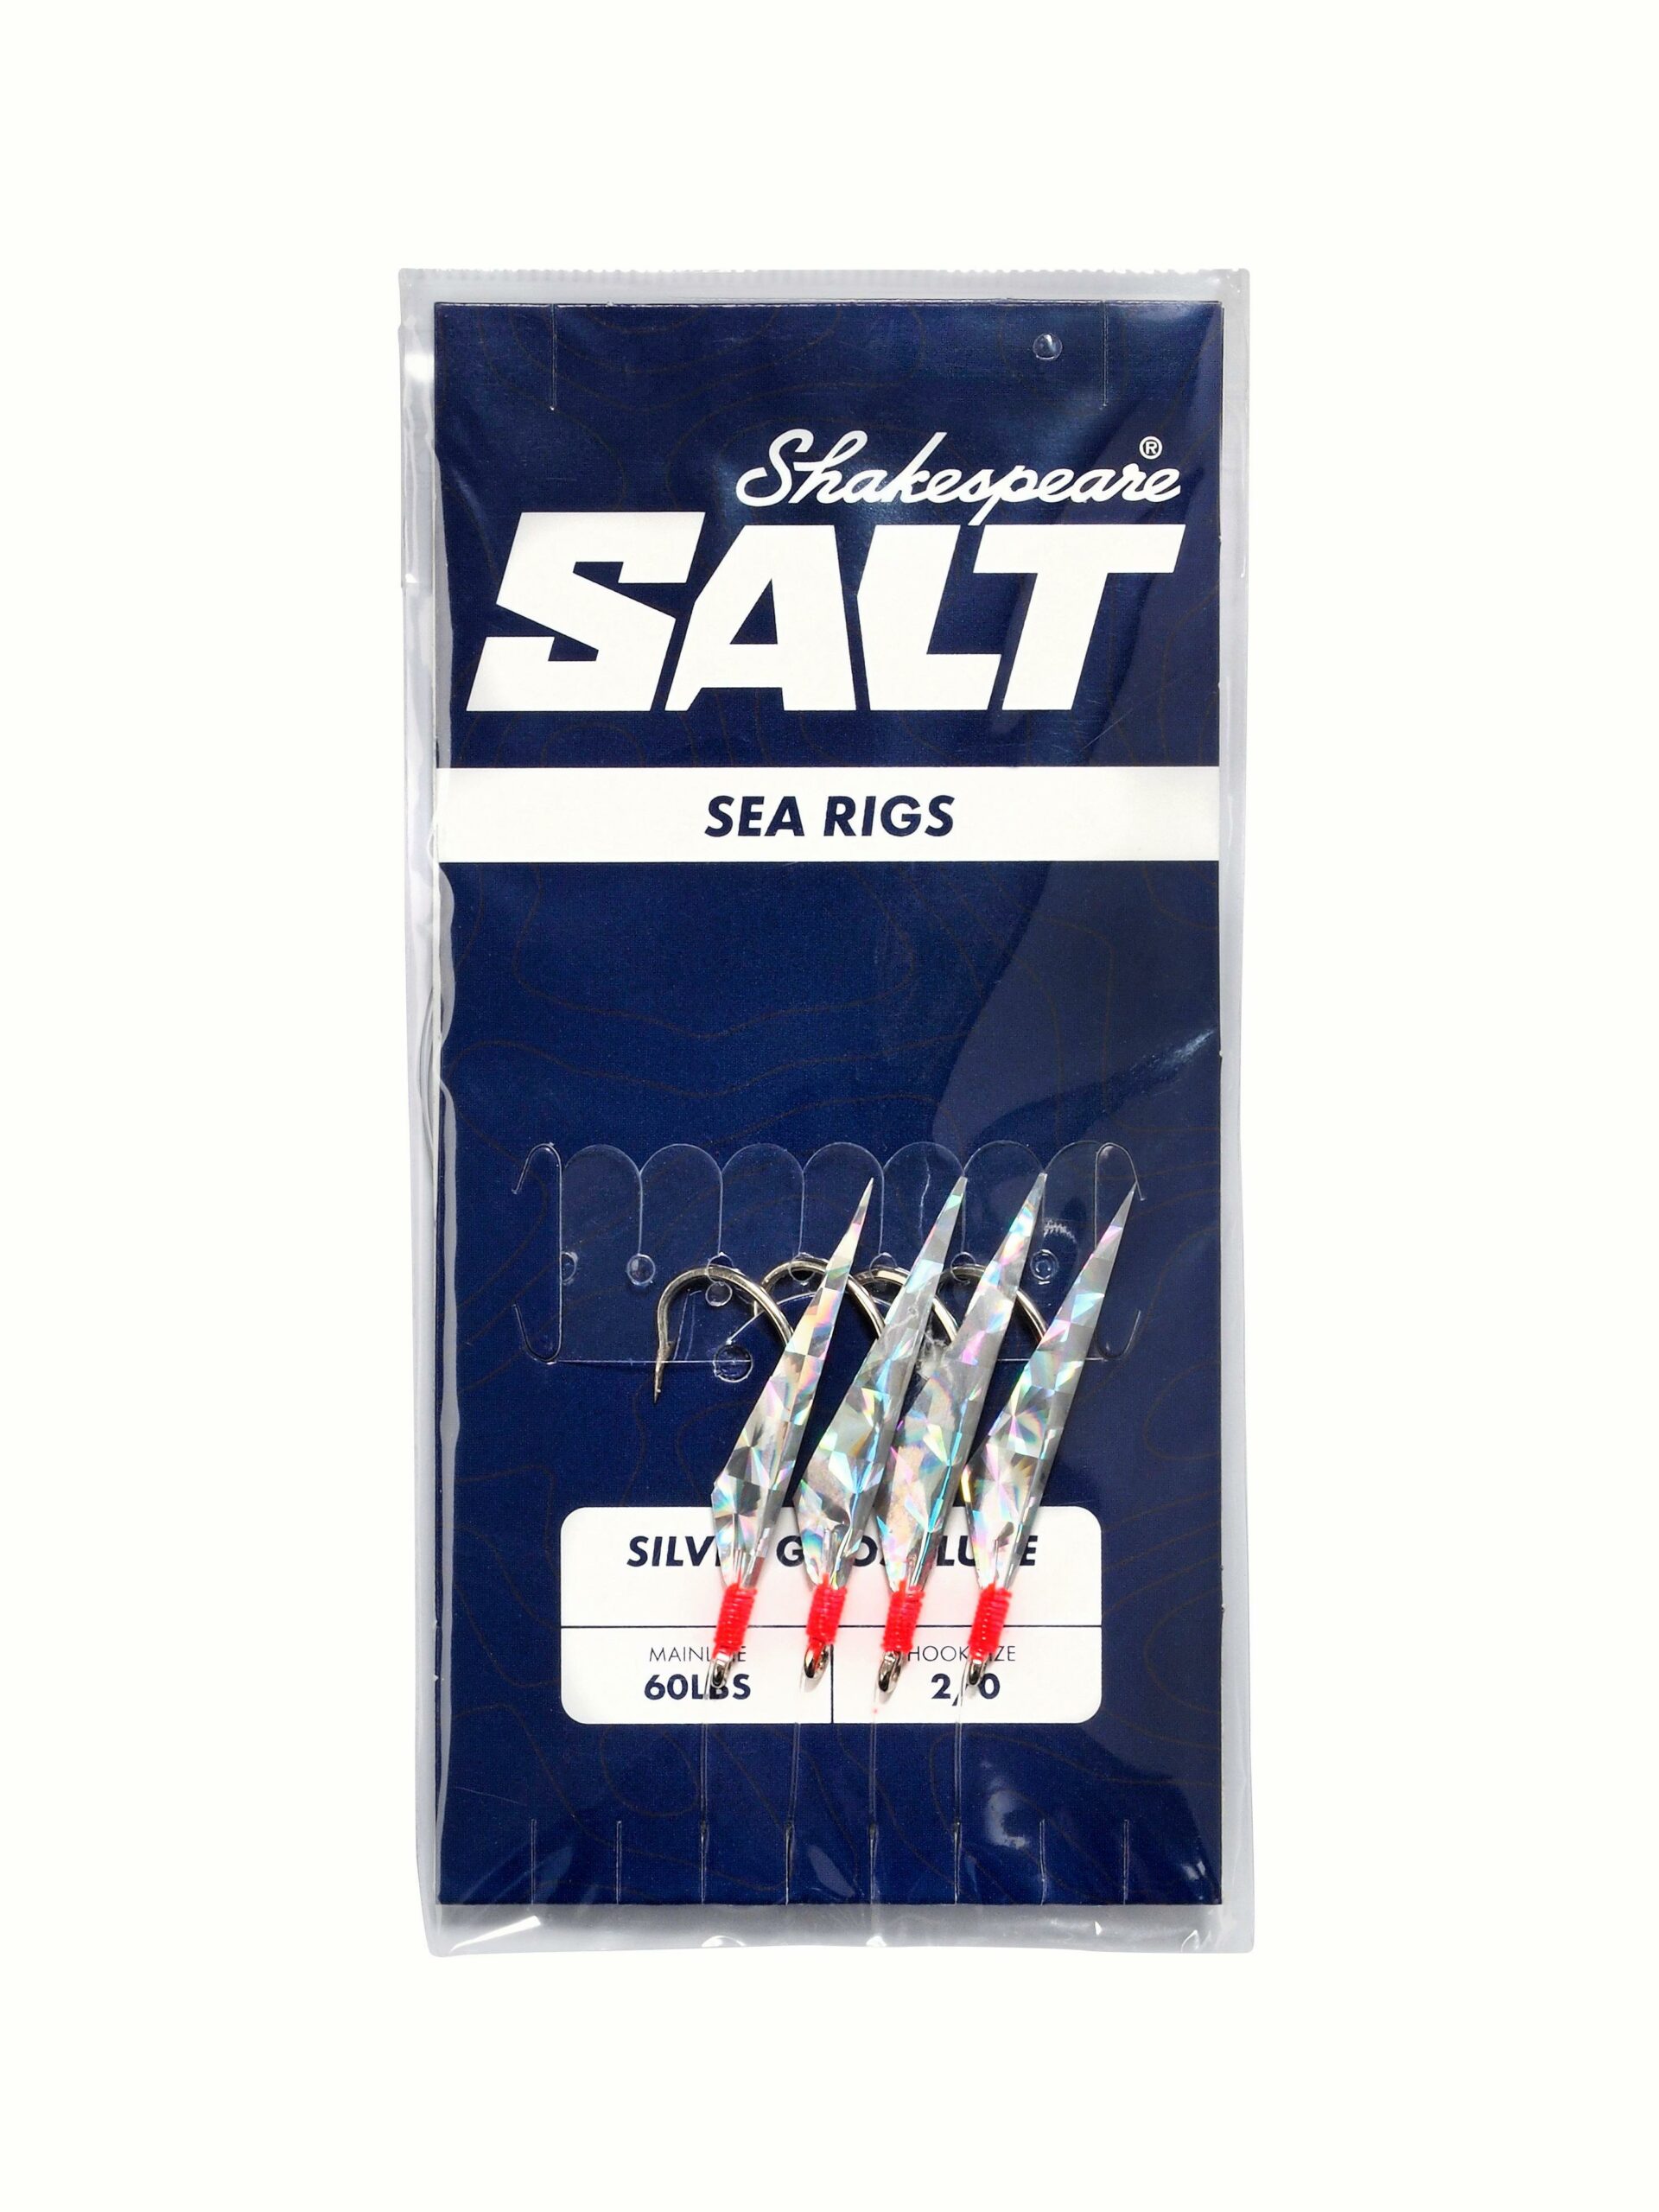 Shakespeare Salt Rig Silver Ghost Lure 2/0